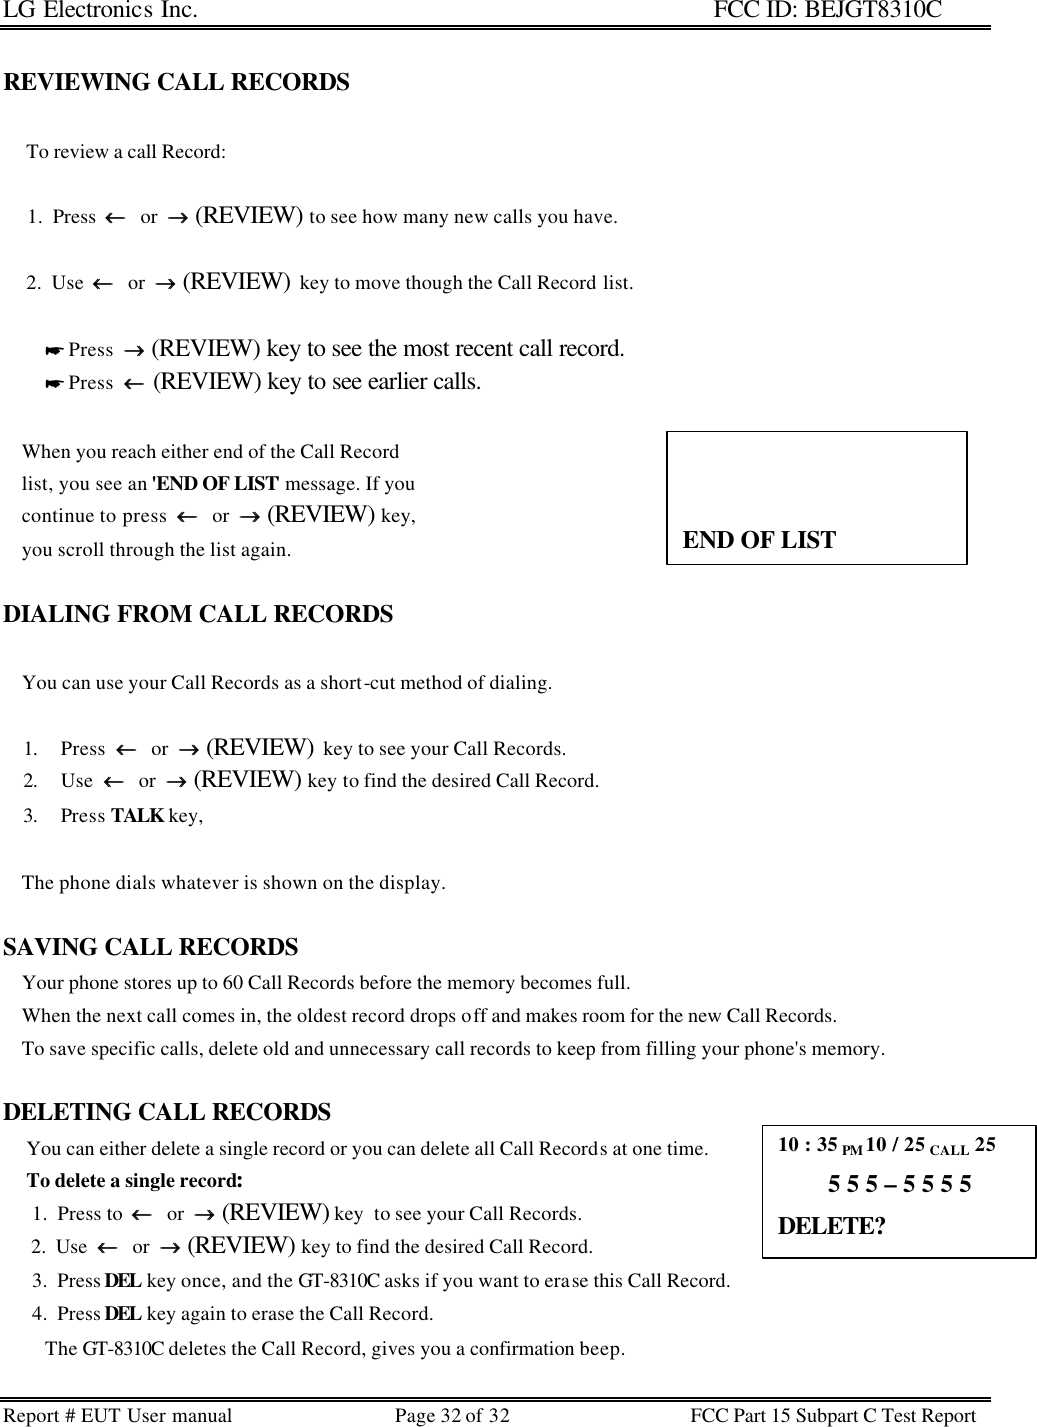 LG Electronics Inc.                                                                                                   FCC ID: BEJGT8310C Report # EUT User manual Page 32 of 32 FCC Part 15 Subpart C Test Report   REVIEWING CALL RECORDS       To review a call Record:       1.  Press  ←←  or  →→ (REVIEW) to see how many new calls you have.       2.  Use  ←←  or  →→ (REVIEW)  key to move though the Call Record list.                    * Press  →→ (REVIEW) key to see the most recent call record.          * Press  ←← (REVIEW) key to see earlier calls.      When you reach either end of the Call Record     list, you see an &apos;END OF LIST&apos; message. If you     continue to press  ←←  or  →→ (REVIEW) key,     you scroll through the list again.   DIALING FROM CALL RECORDS      You can use your Call Records as a short-cut method of dialing.  1. Press  ←←  or  →→ (REVIEW)  key to see your Call Records. 2. Use  ←←  or  →→ (REVIEW) key to find the desired Call Record. 3. Press TALK key,      The phone dials whatever is shown on the display.  SAVING CALL RECORDS     Your phone stores up to 60 Call Records before the memory becomes full.     When the next call comes in, the oldest record drops off and makes room for the new Call Records.      To save specific calls, delete old and unnecessary call records to keep from filling your phone&apos;s memory.   DELETING CALL RECORDS      You can either delete a single record or you can delete all Call Records at one time.      To delete a single record:       1.  Press to  ←←  or  →→ (REVIEW) key  to see your Call Records.       2.  Use  ←←  or  →→ (REVIEW) key to find the desired Call Record.       3.  Press DEL key once, and the GT-8310C asks if you want to erase this Call Record.        4.  Press DEL key again to erase the Call Record.          The GT-8310C deletes the Call Record, gives you a confirmation beep.                 END OF LIST 10 : 35 PM 10 / 25 CALL 25         5 5 5 – 5 5 5 5 DELETE? 